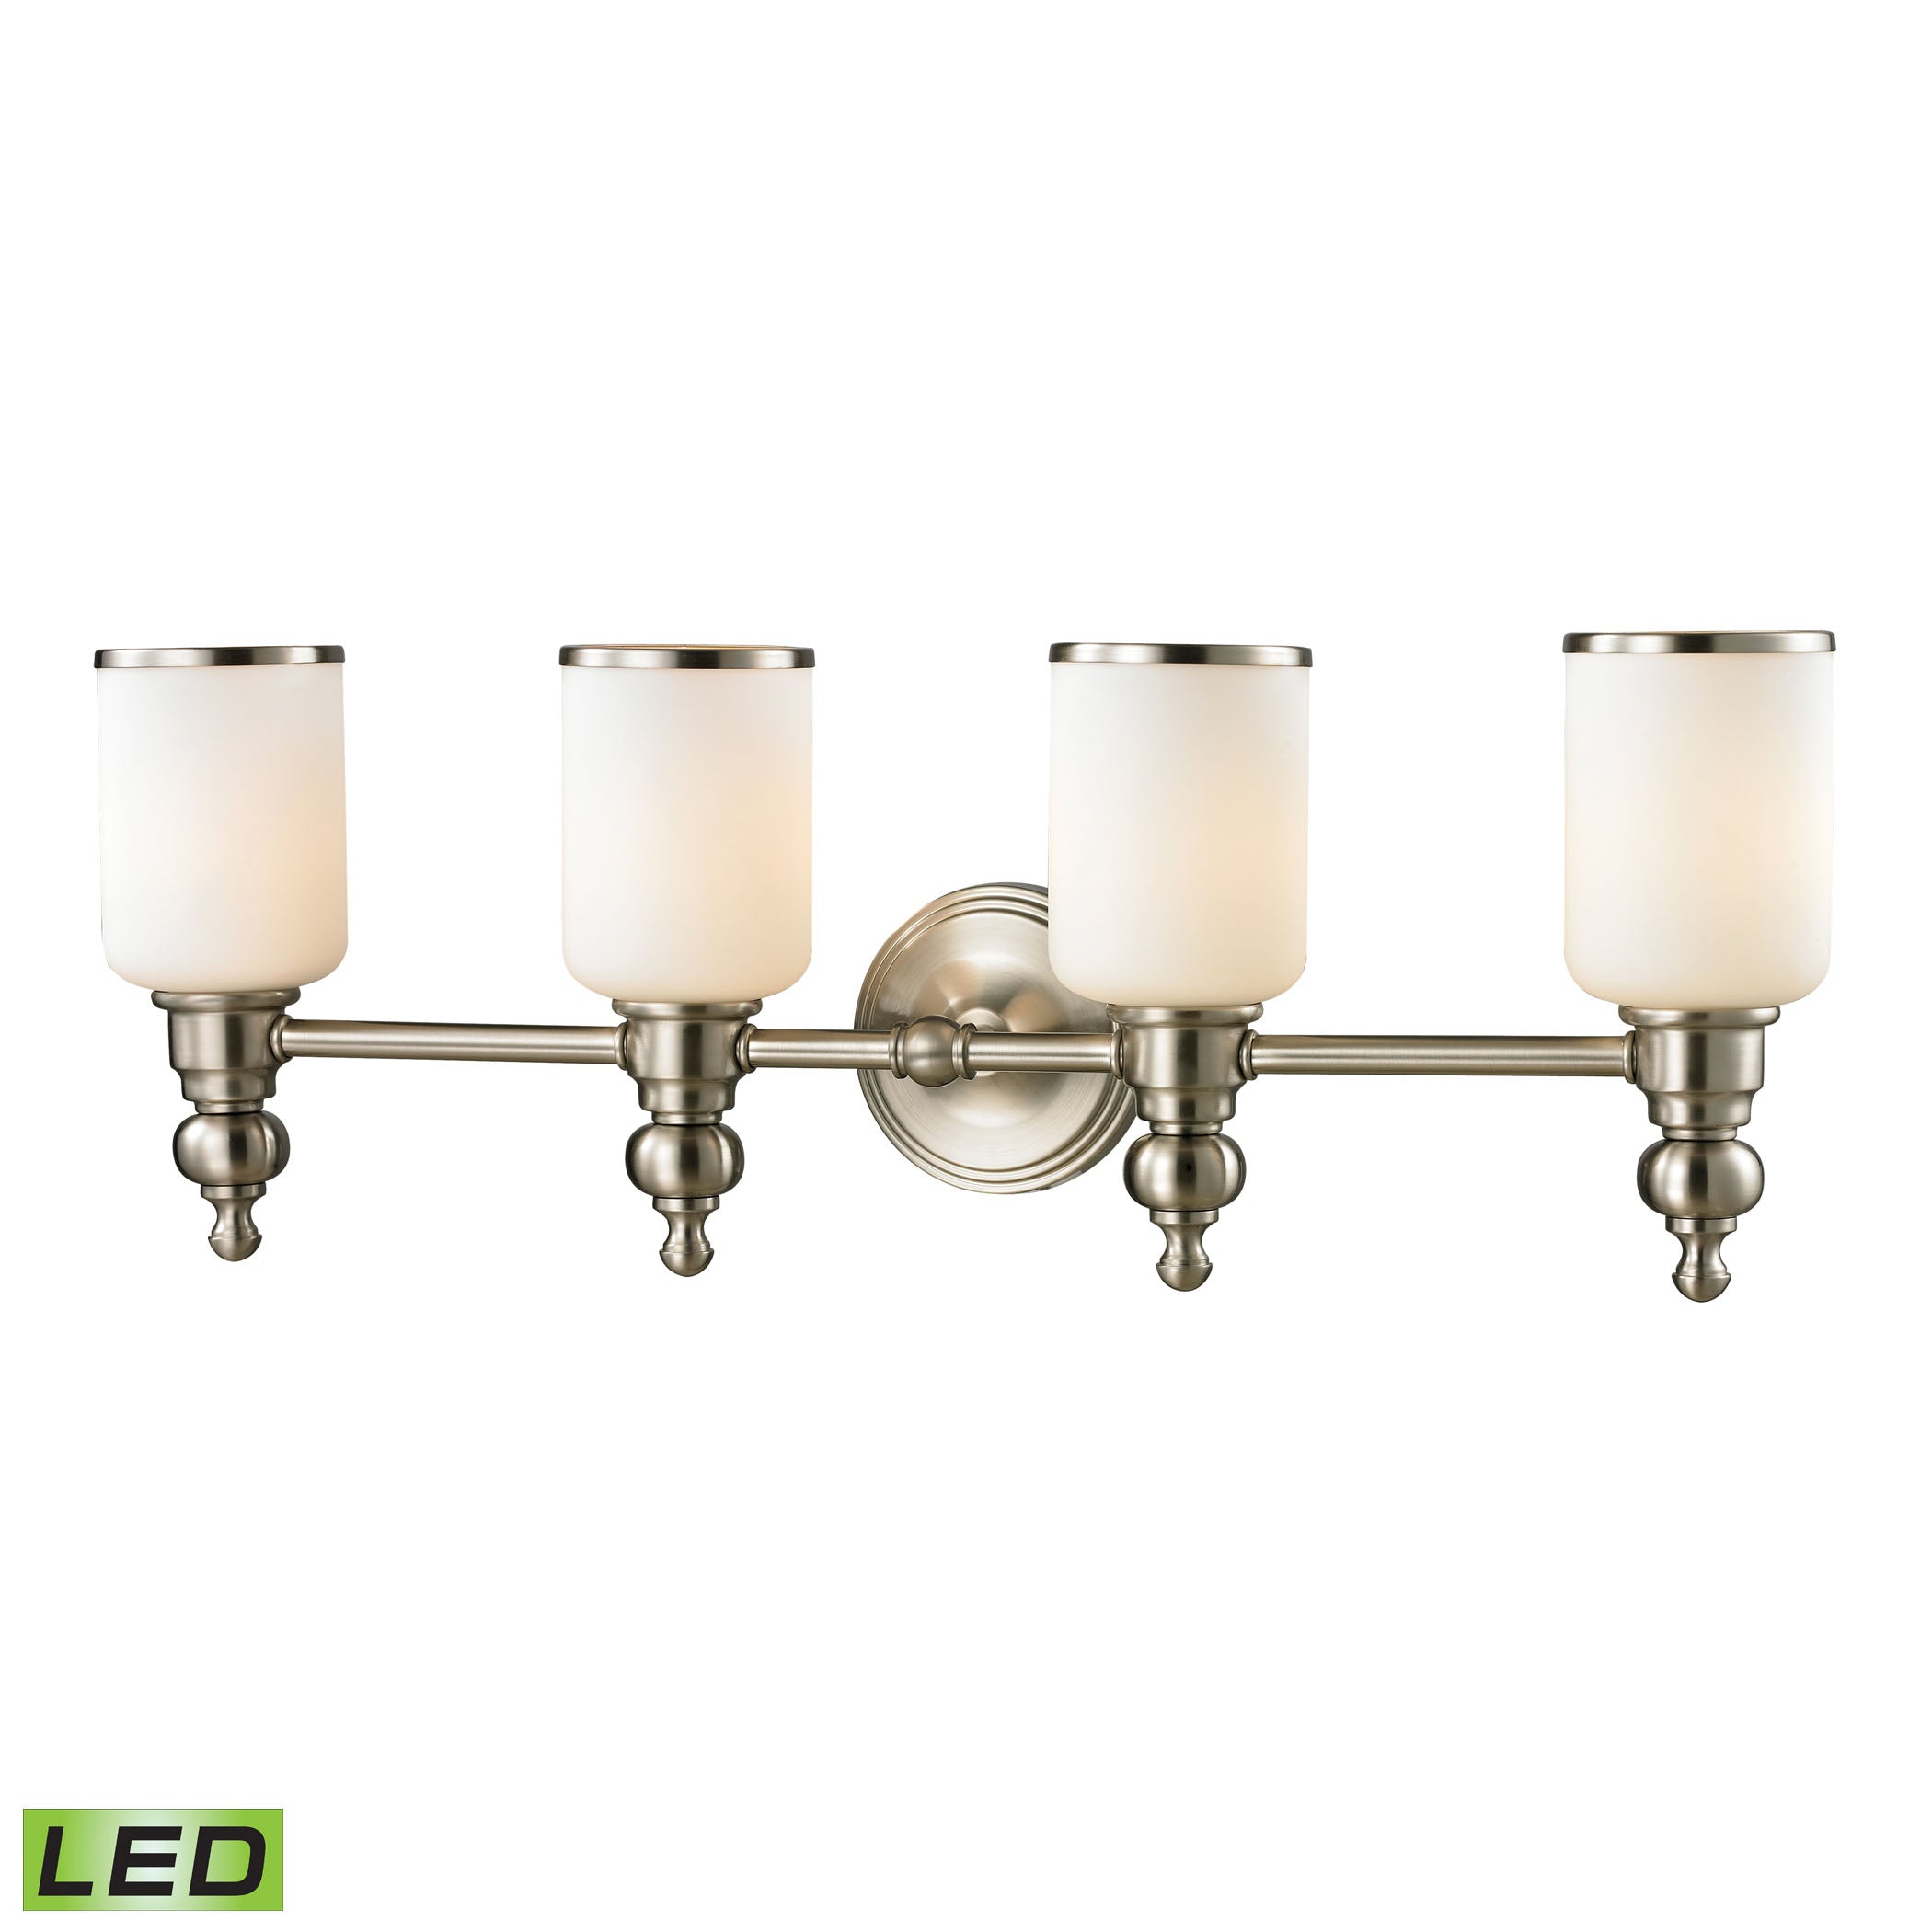 ELK Lighting 11583/4-LED Bristol 4-Light Vanity Lamp in Brushed Nickel with Opal White Blown Glass - Includes LED Bulbs